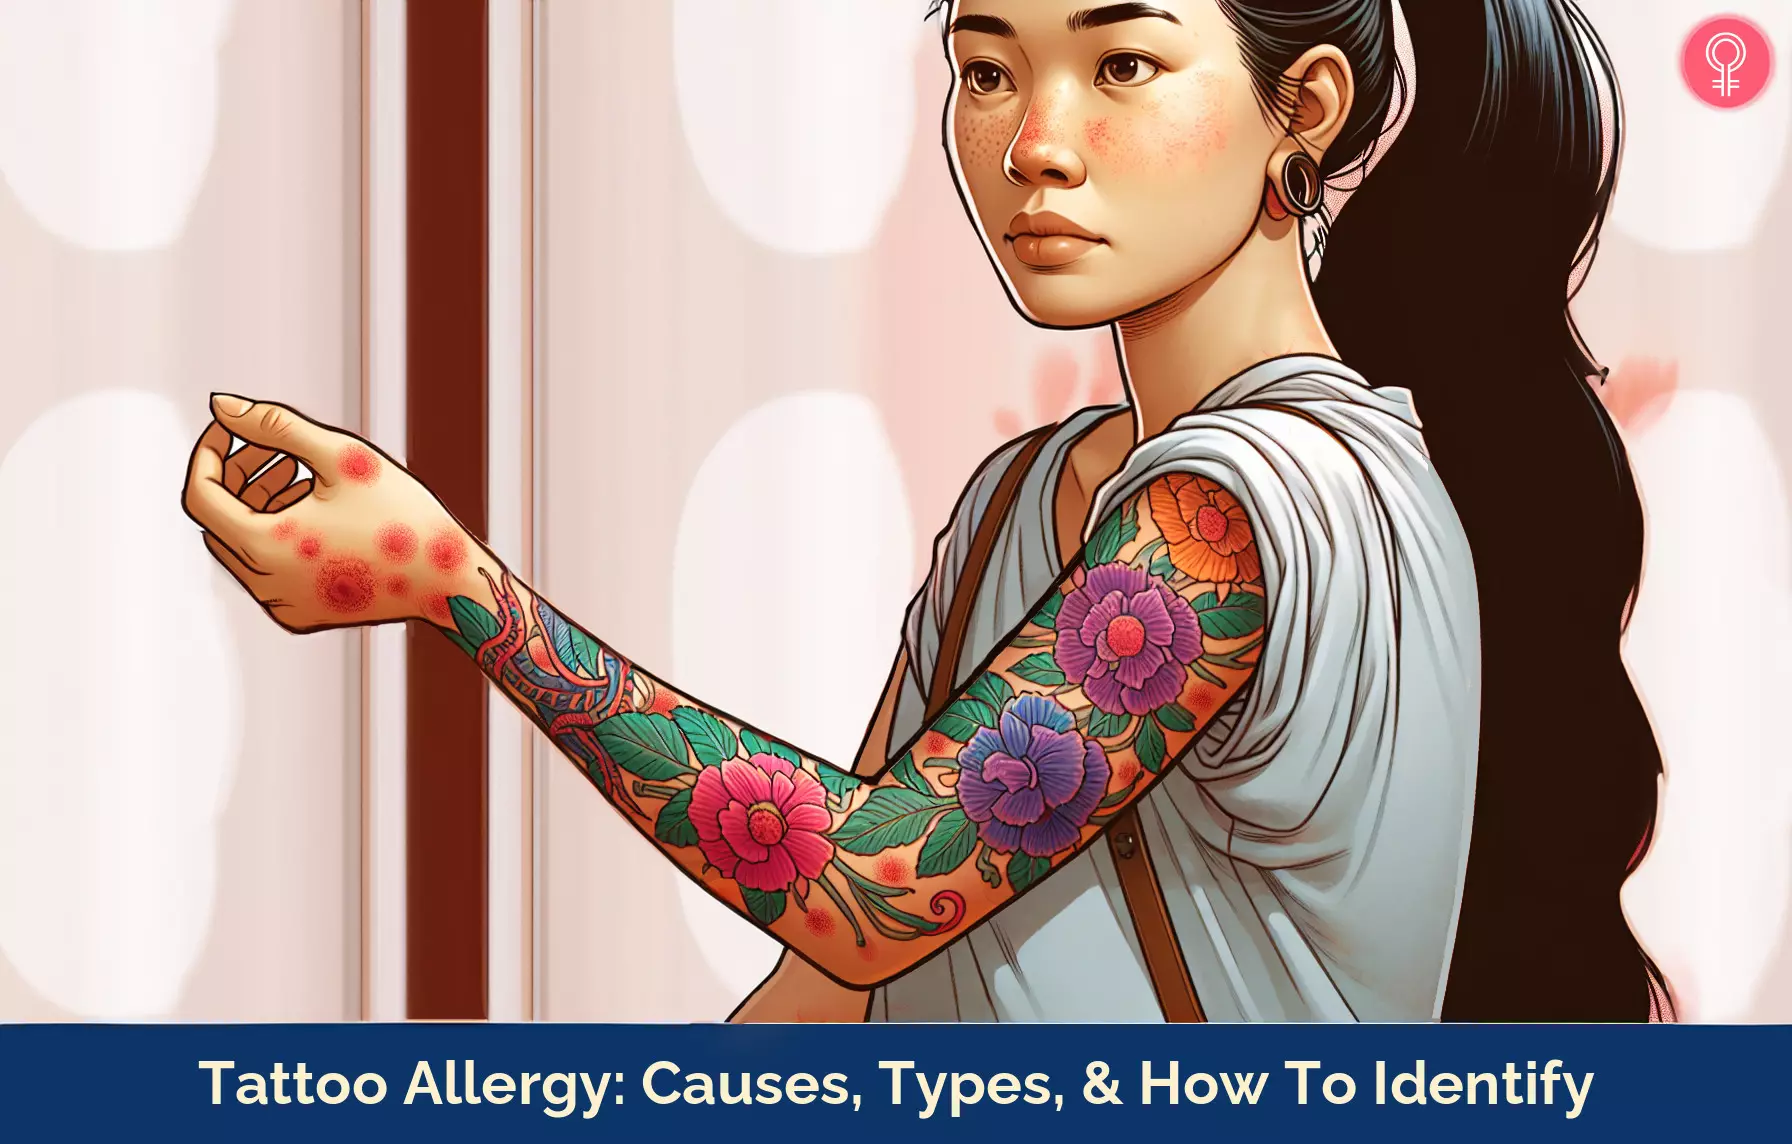 Tattoo Allergy: Causes, Types, & How To Identify